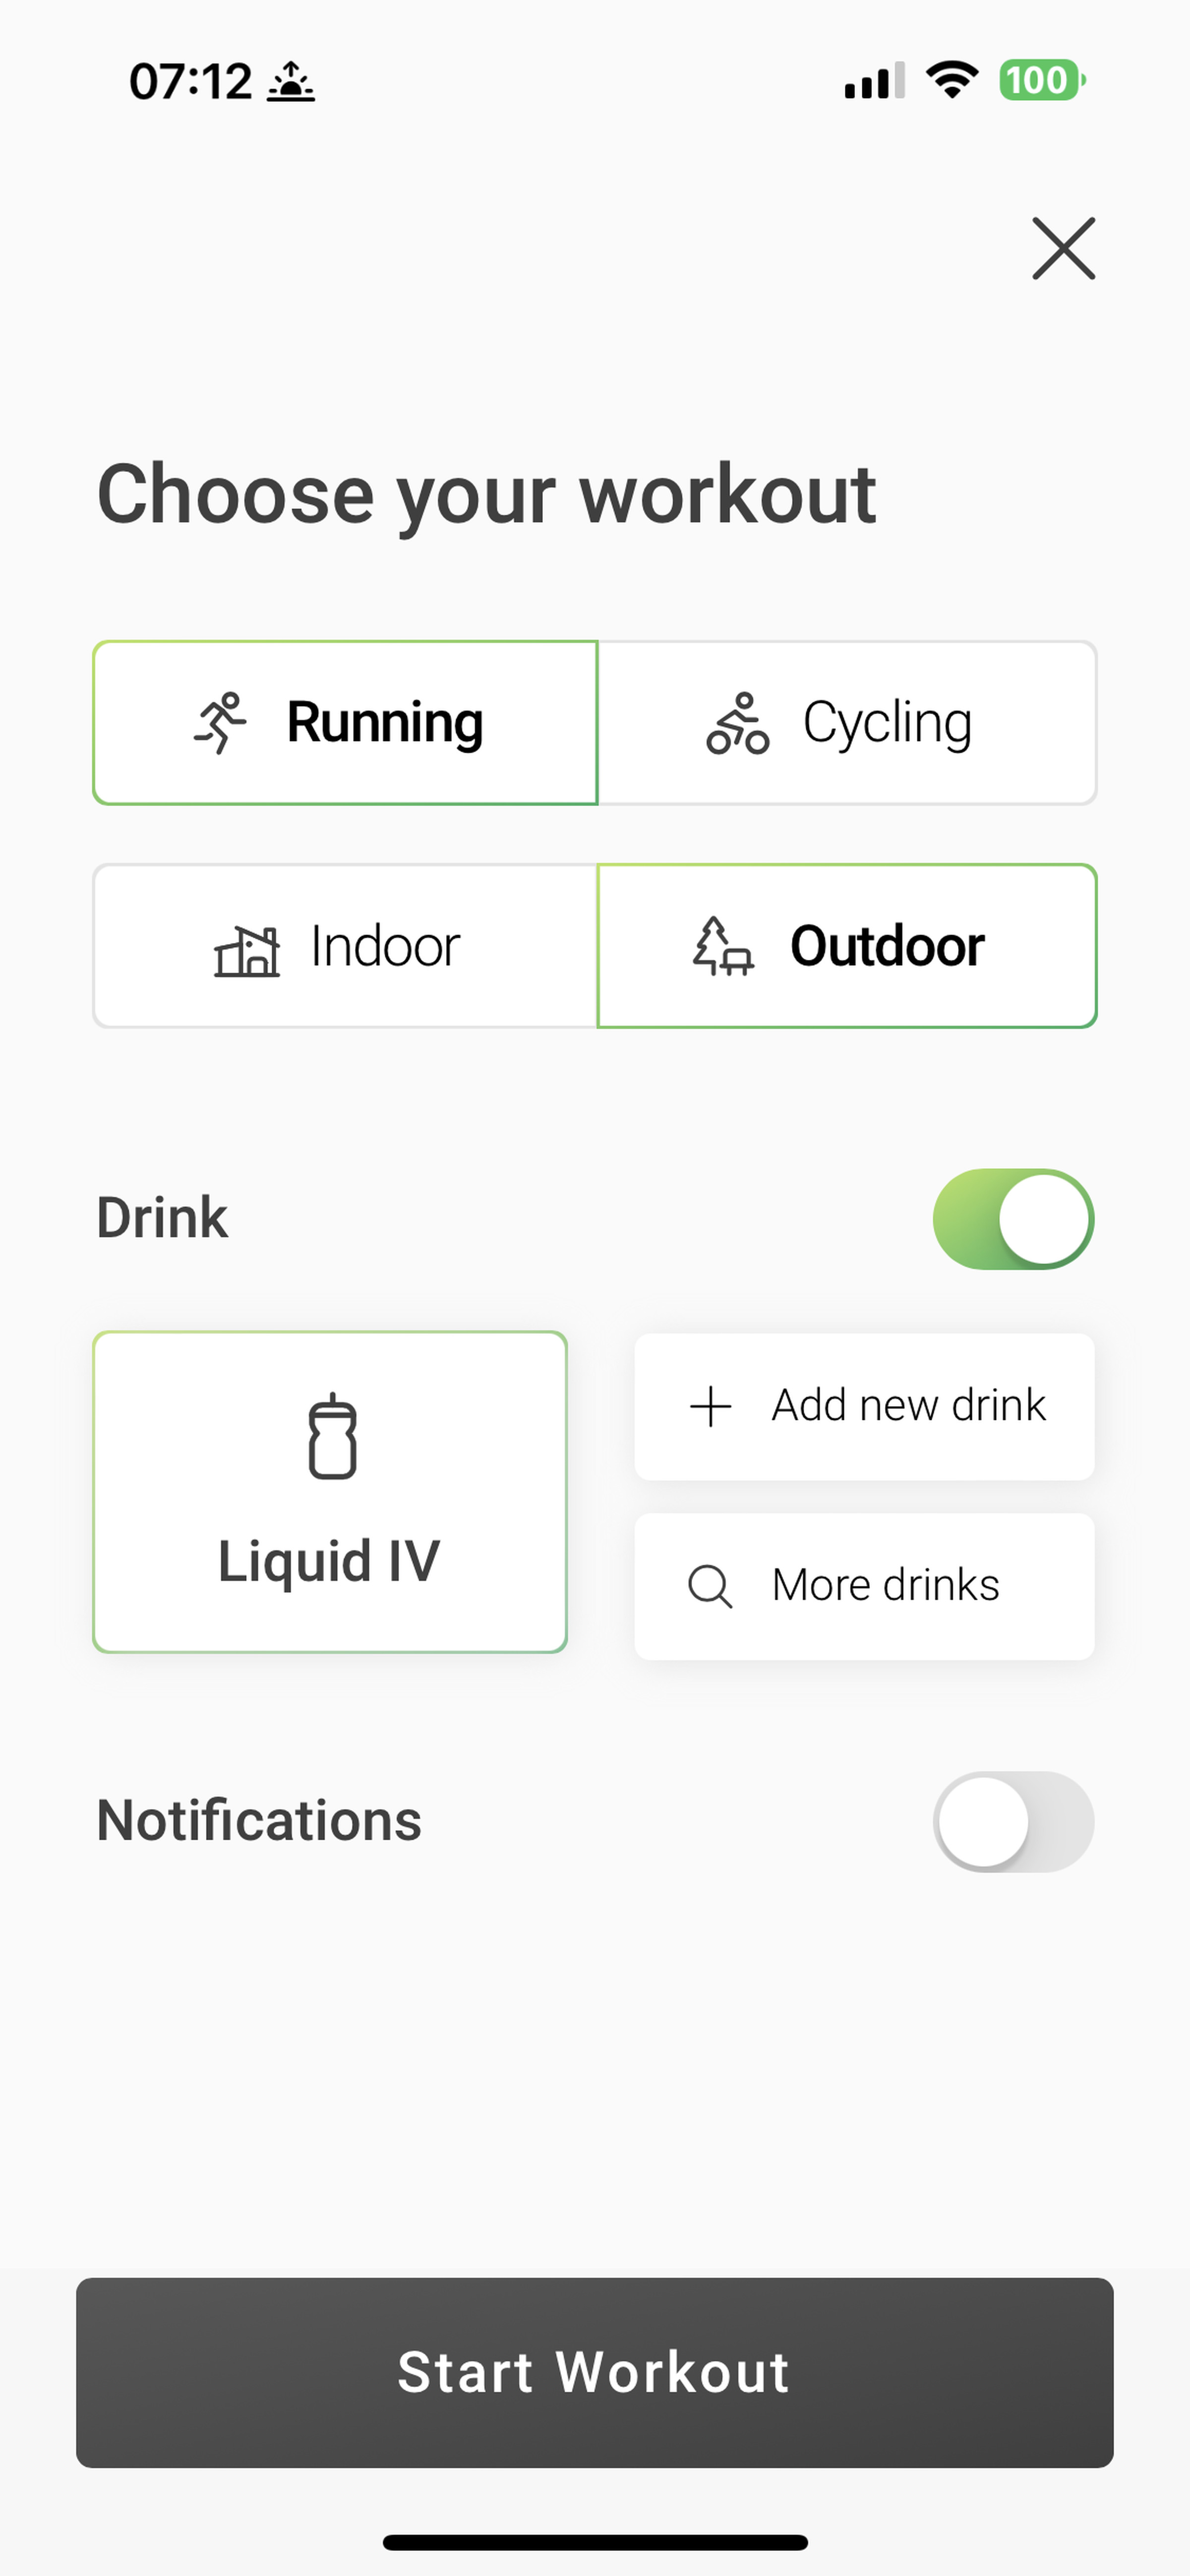 <em>The app is fairly simple, but I found the hydration beverage chart helpful.</em>